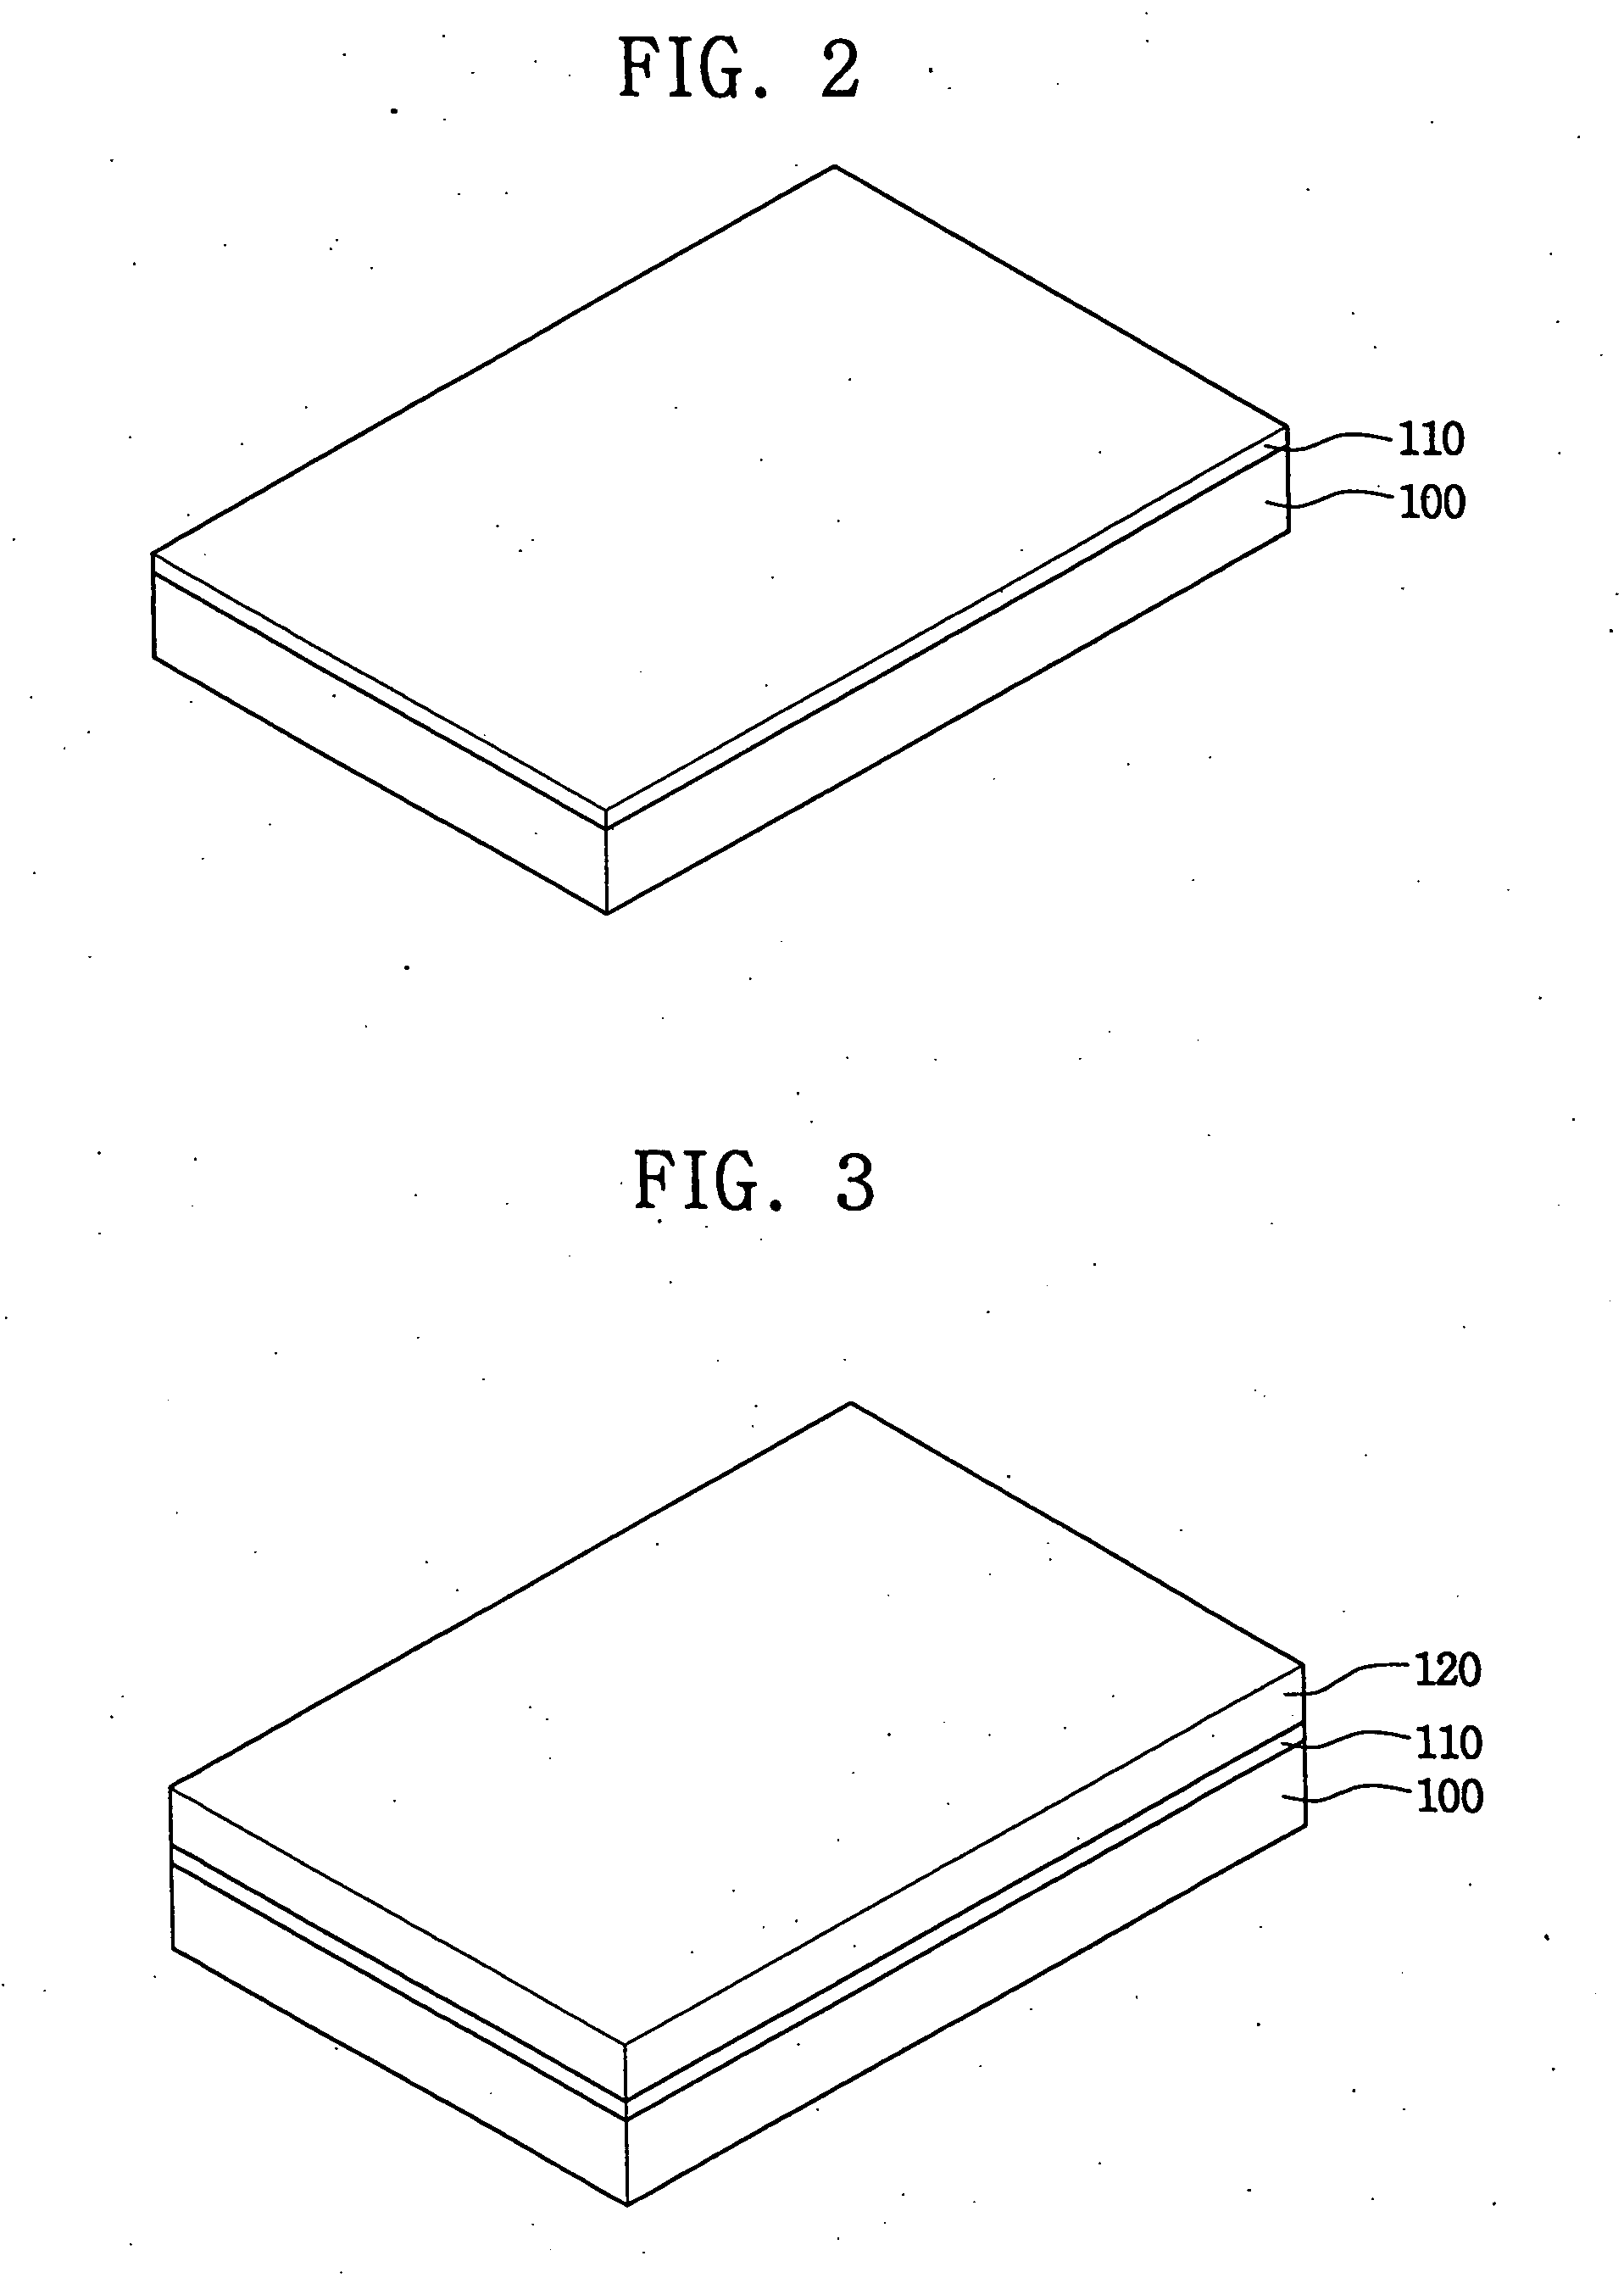 Semiconductor device with different lattice properties